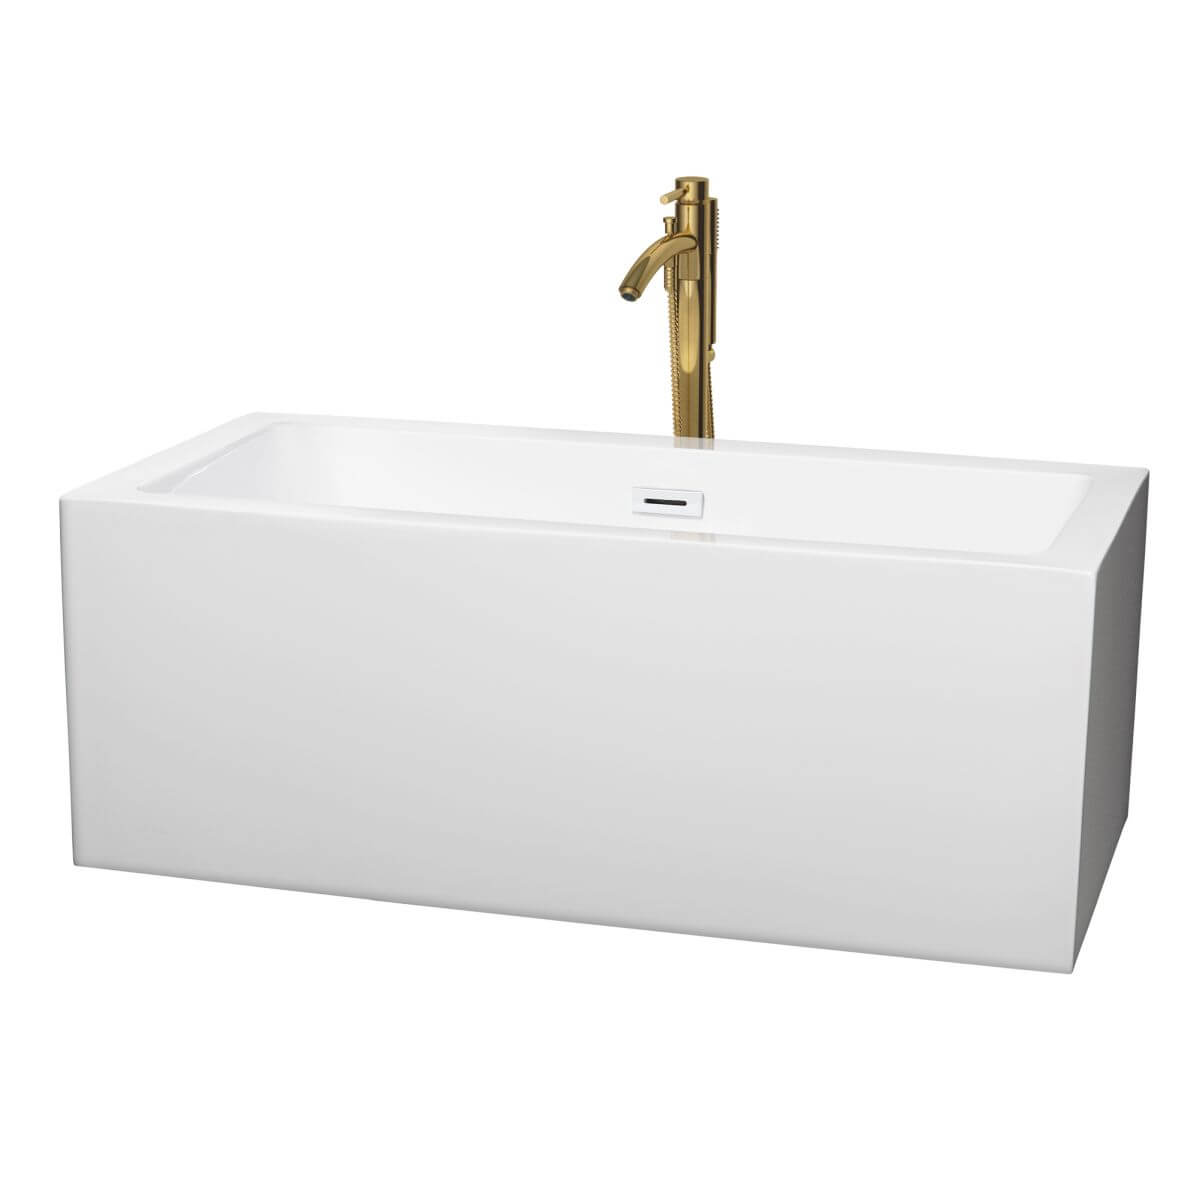 Wyndham Collection Melody 60 inch Freestanding Bathtub in White with Shiny White Trim and Floor Mounted Faucet in Brushed Gold - WCOBT101160SWATPGD